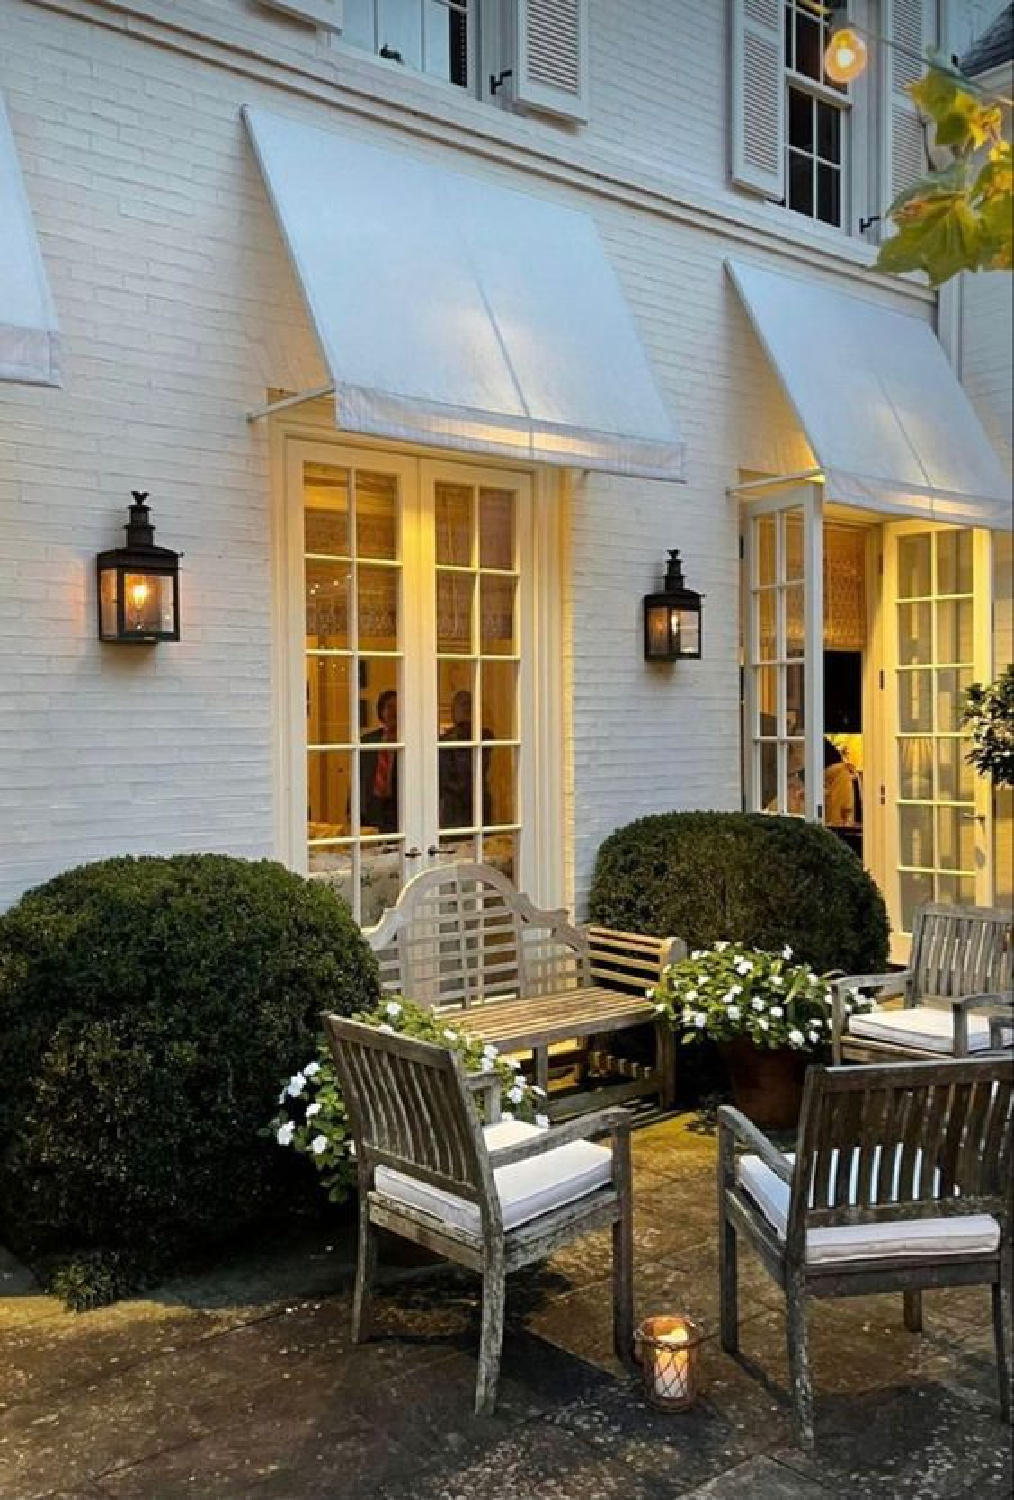 Beautiful traditional white Southern home with awnings (Caroline Gidiere Design and architect James Carter). #carolinegidiere #whitefacades